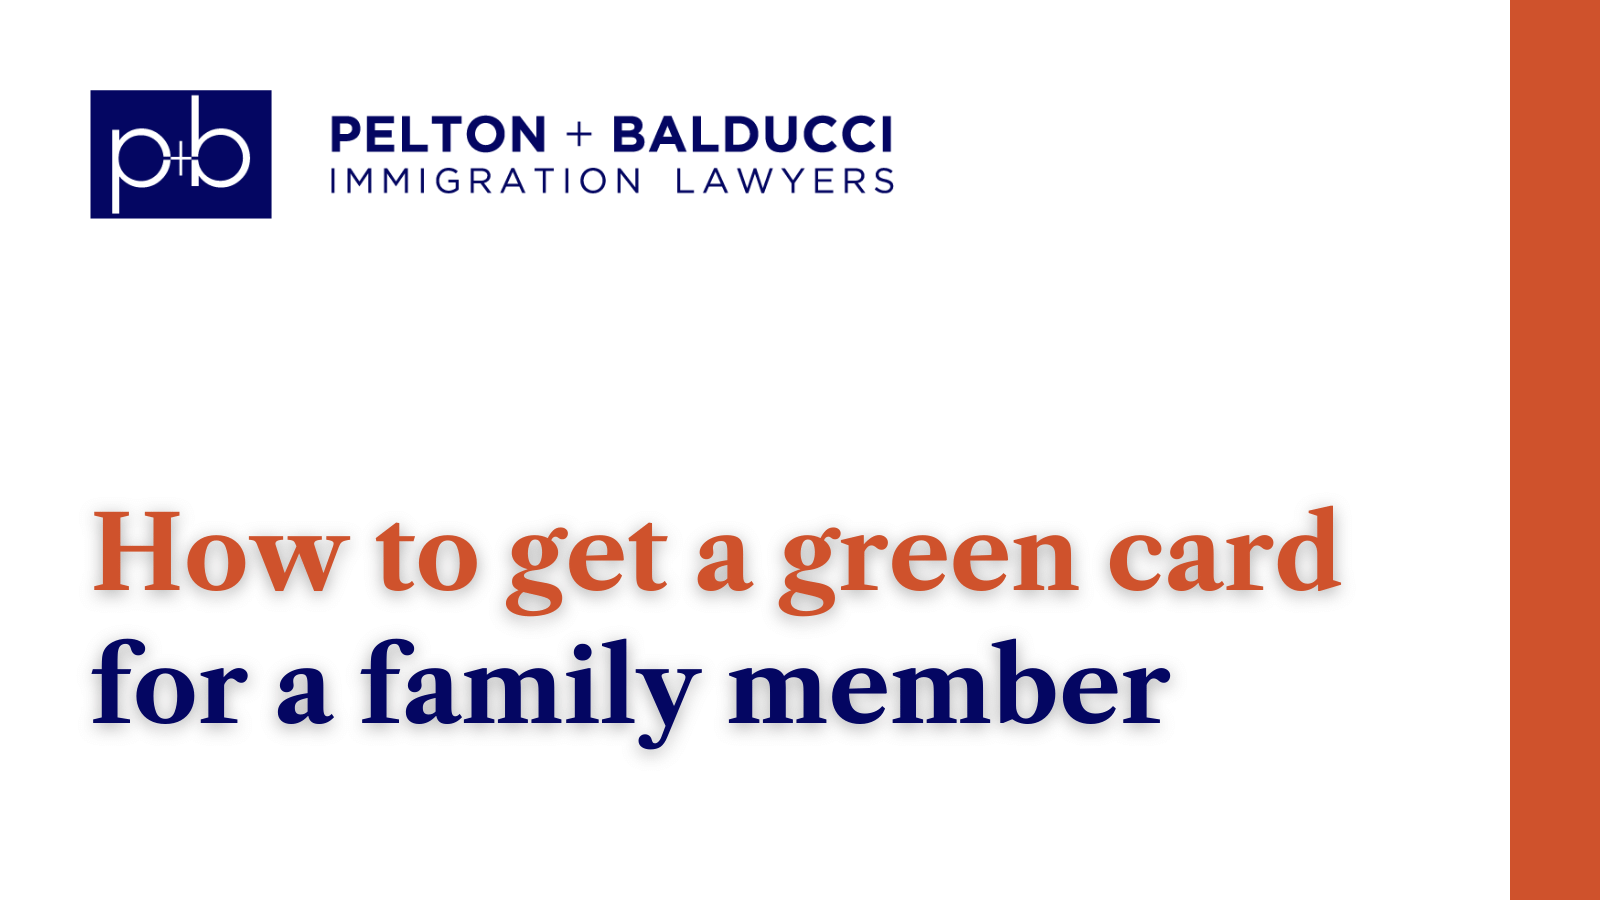 How to get a green card for a family member - New Orleans Immigration Lawyers - Pelton Balducci